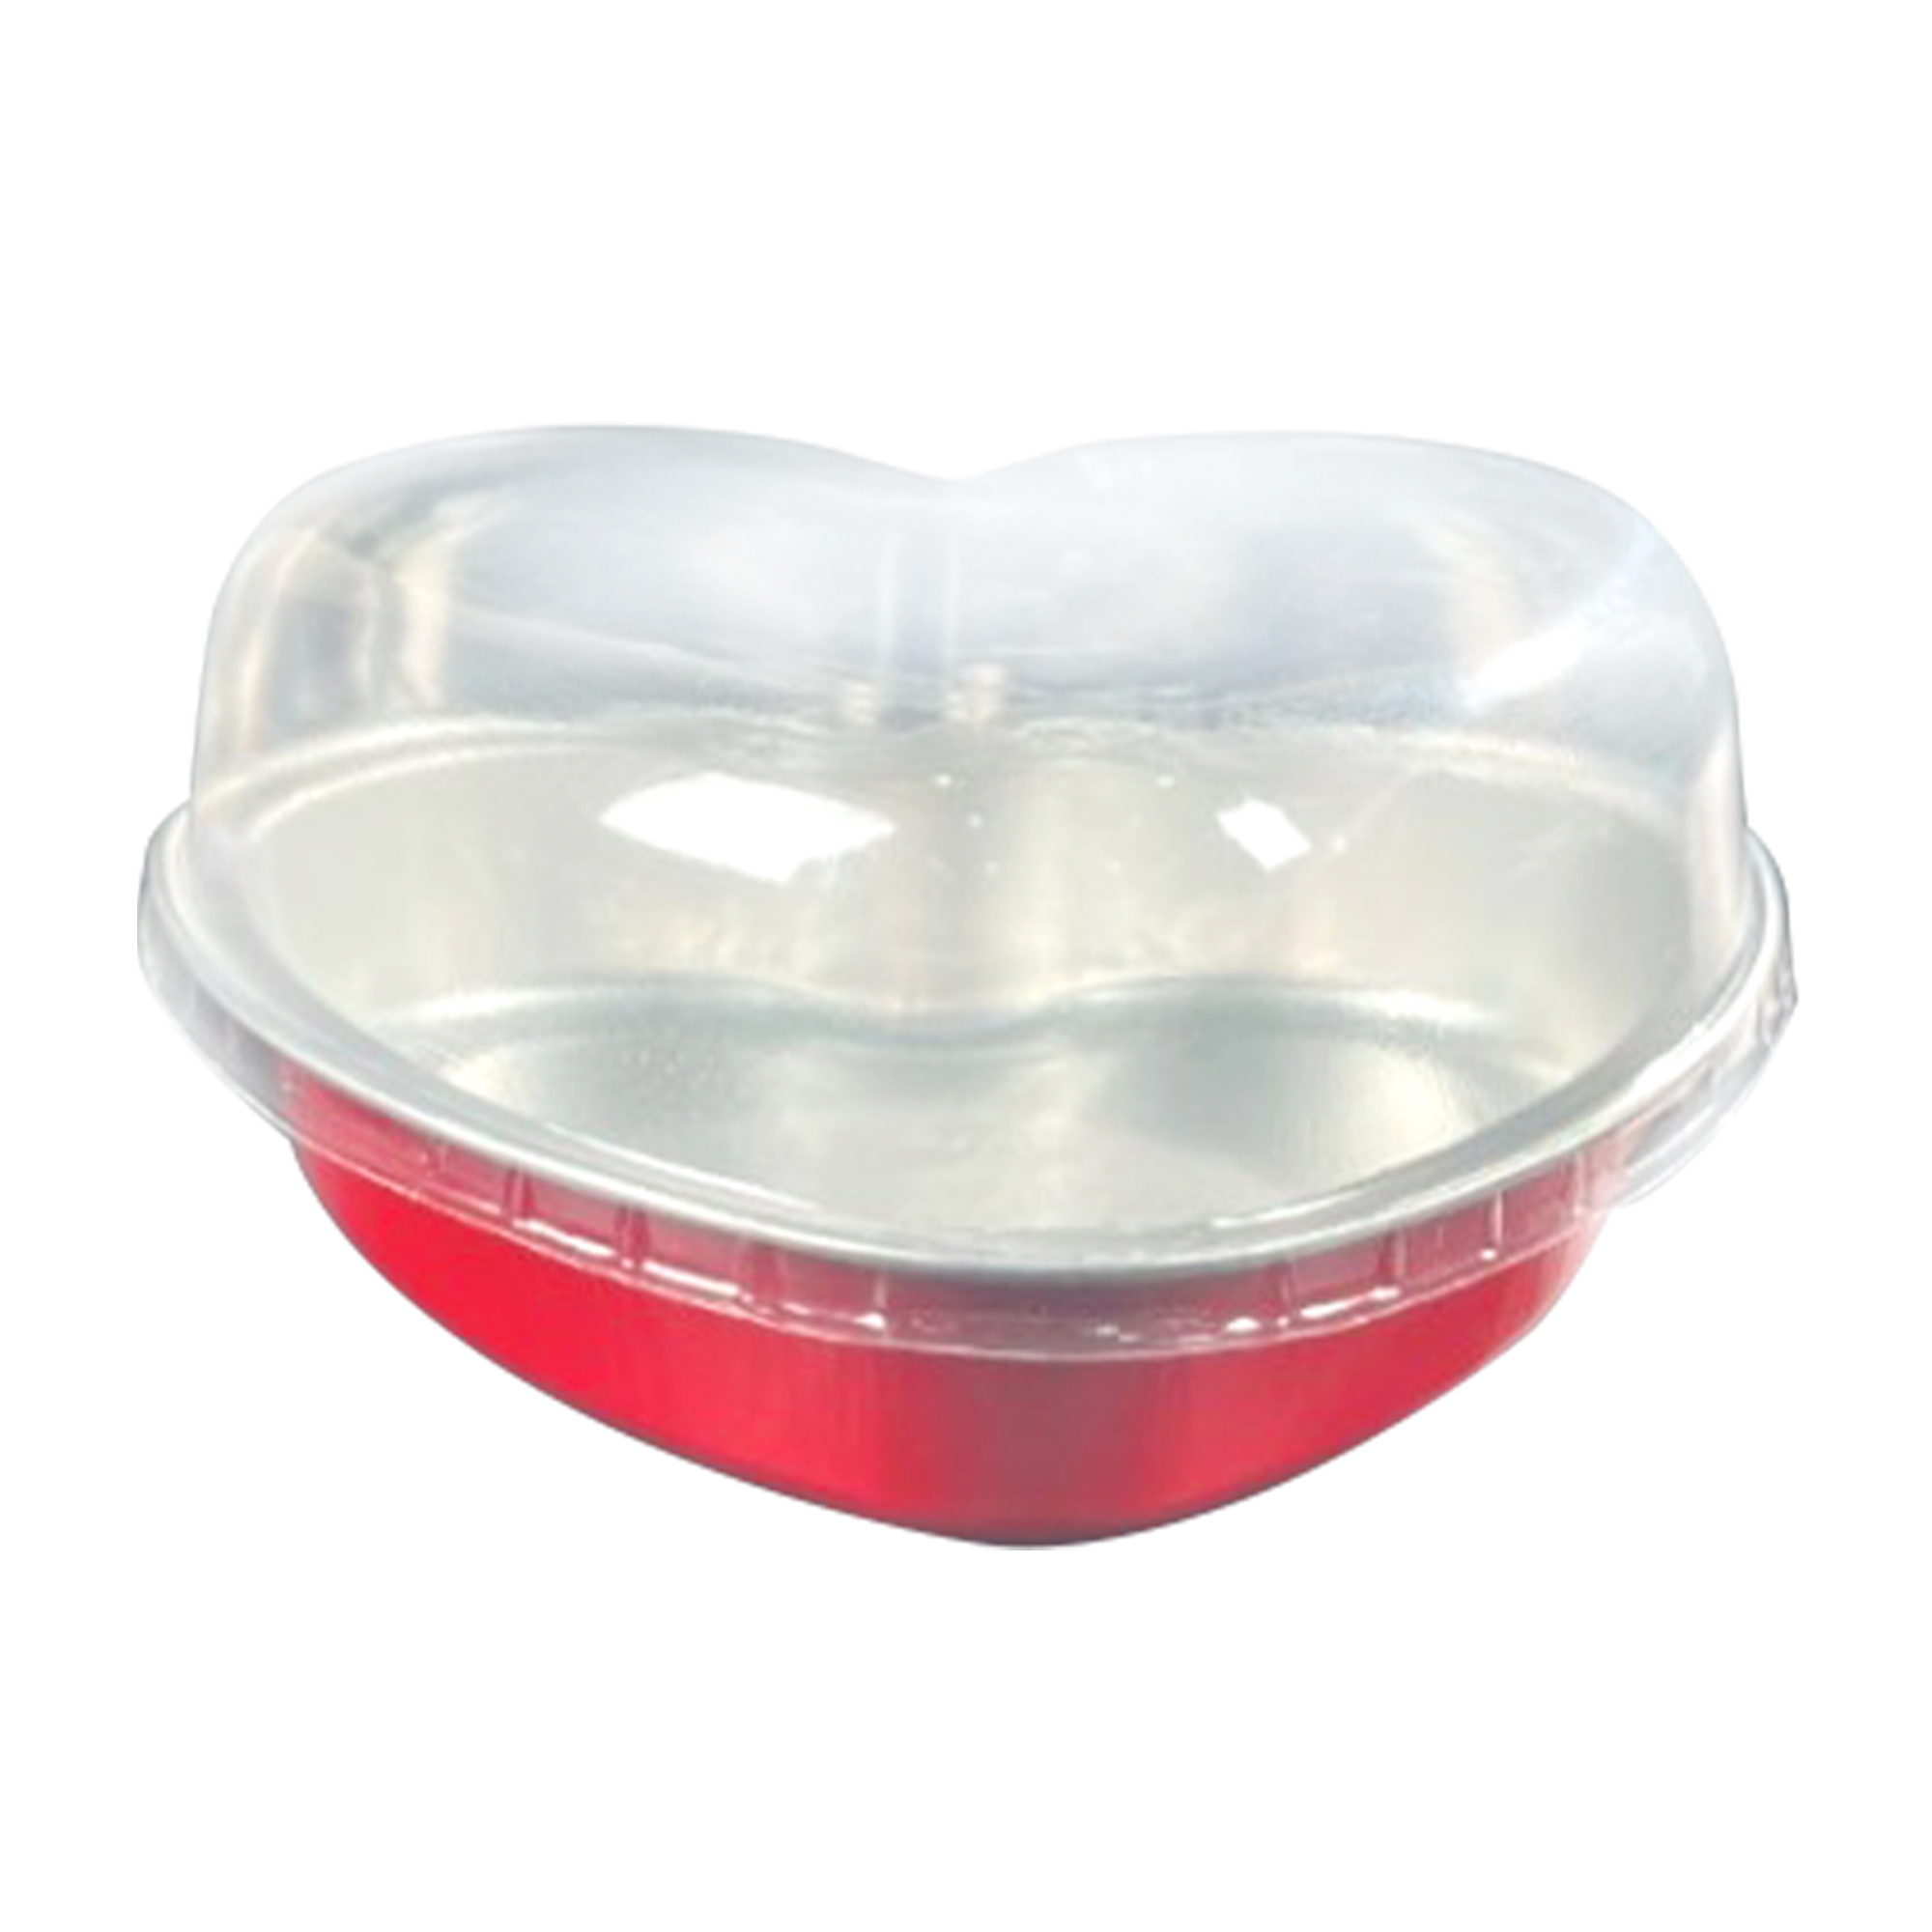 6oz Heart Aluminum Baking Cup With Dome Lid 50pc/pack - Red